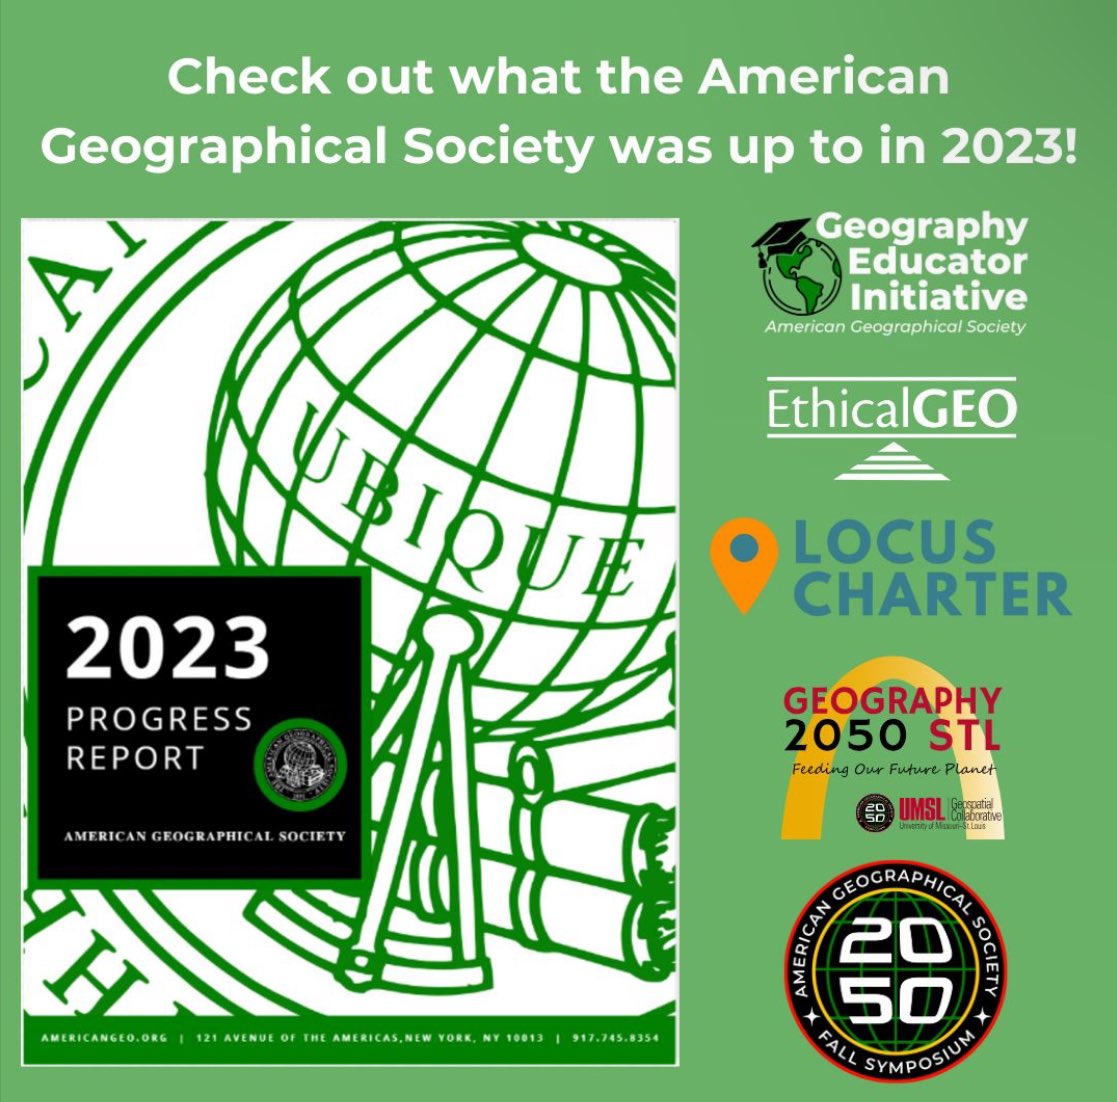 Our 2023 Progress Report is Out! We are grateful for the invaluable support of our partners in advancing our geographic education initiatives and our @geography2050 convenings. 💐 Thank you for being champions of geography for the benefit of society! americangeo.org/annual-progres…